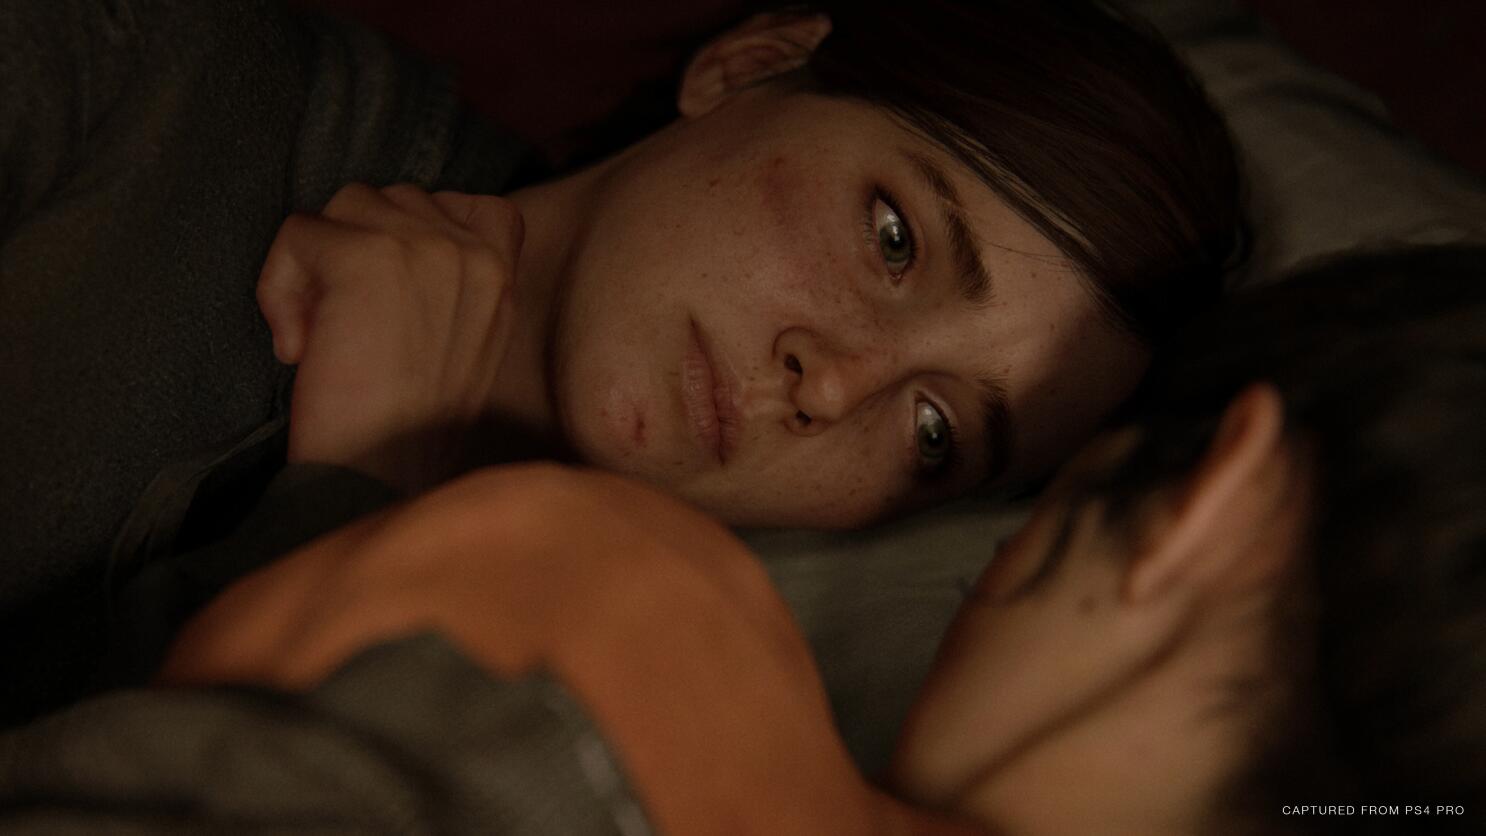 Neil Druckmann explains his inspiration for writing TLOU2 in a